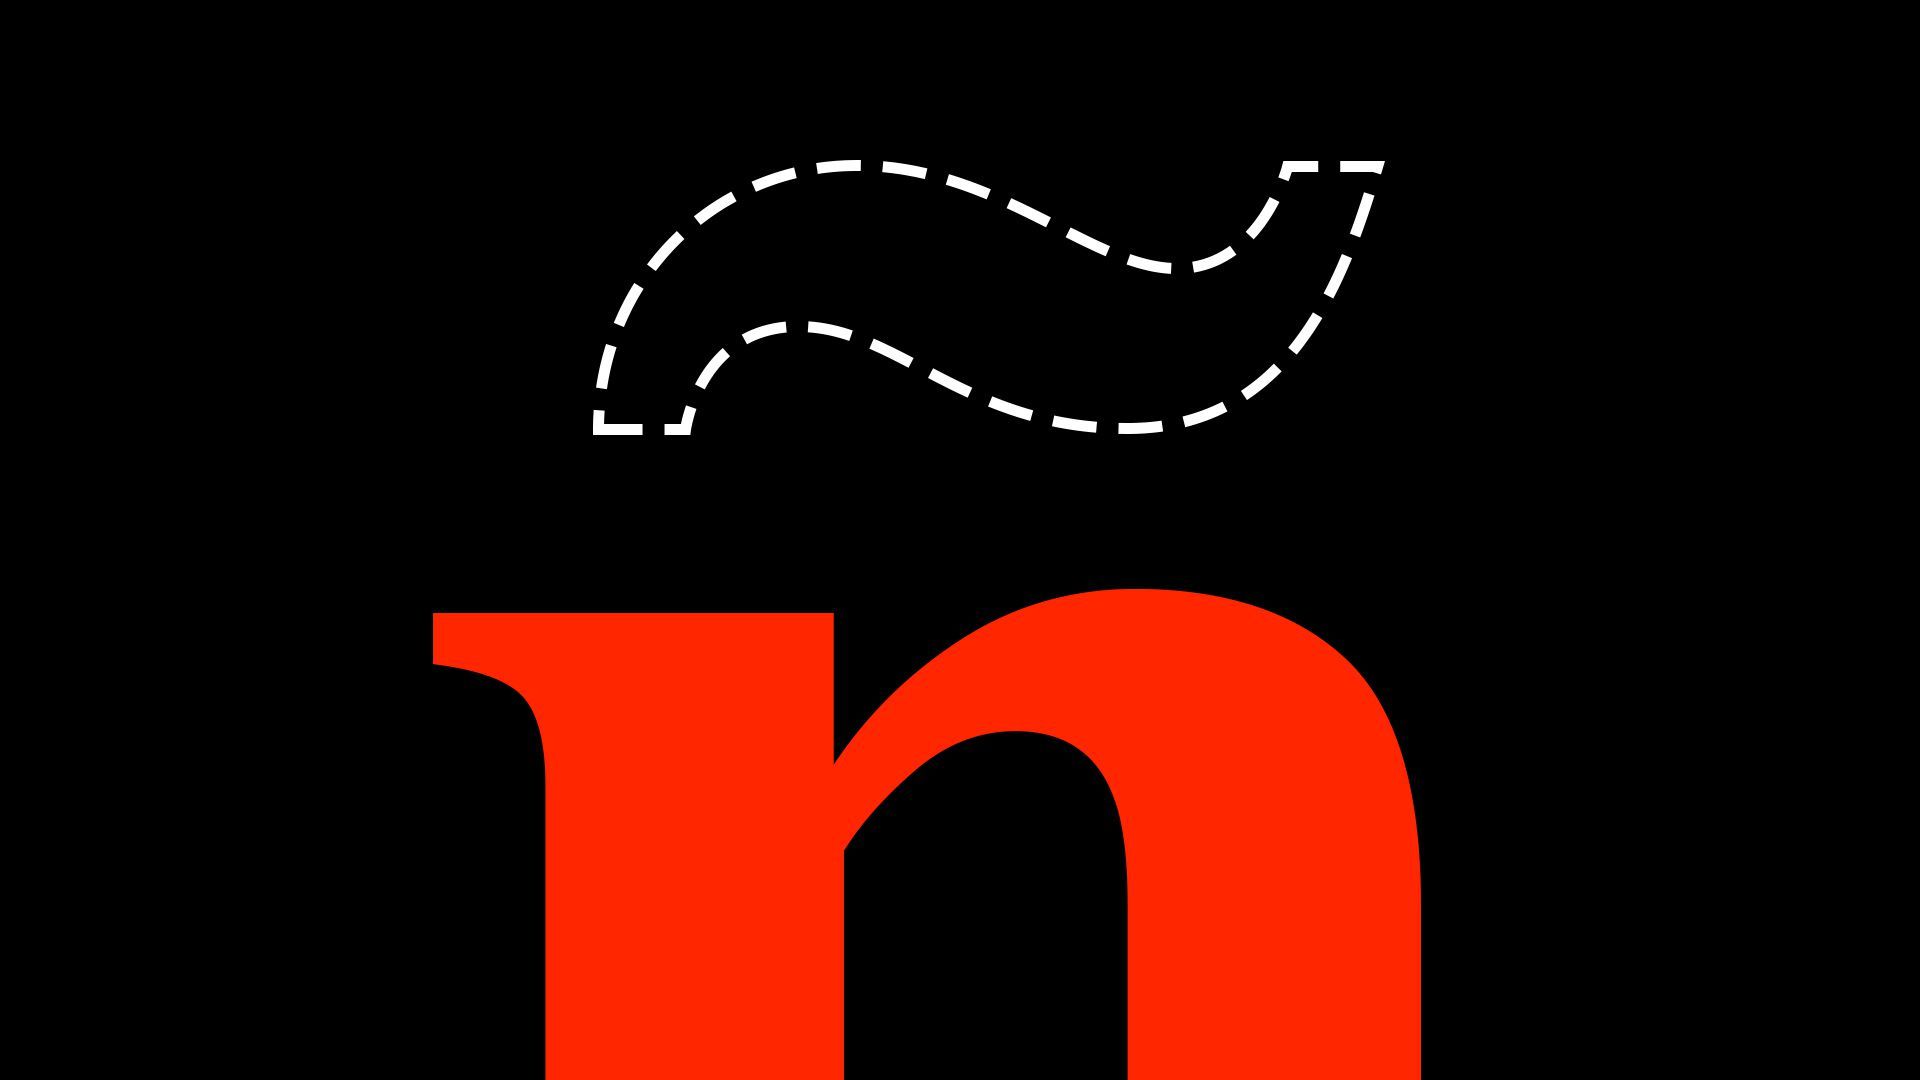 Illustration of a letter n with a missing virgulilla (tilde) mark indicated by a dotted line. 